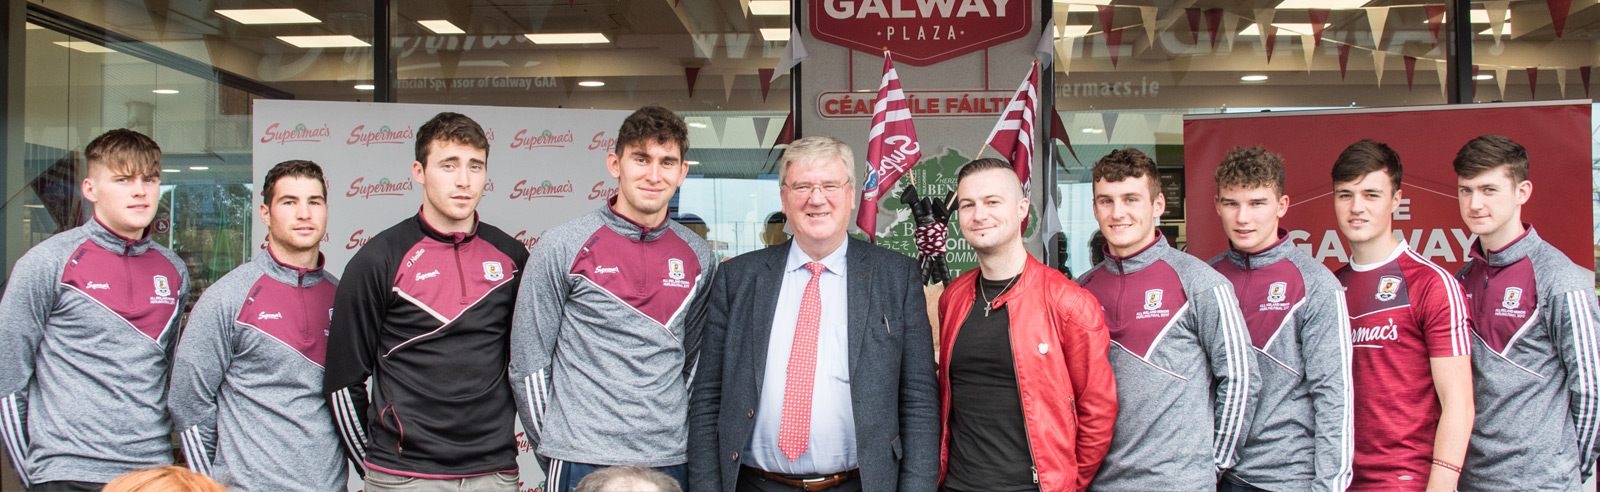 Galway Hurler’s Visit The Galway Plaza